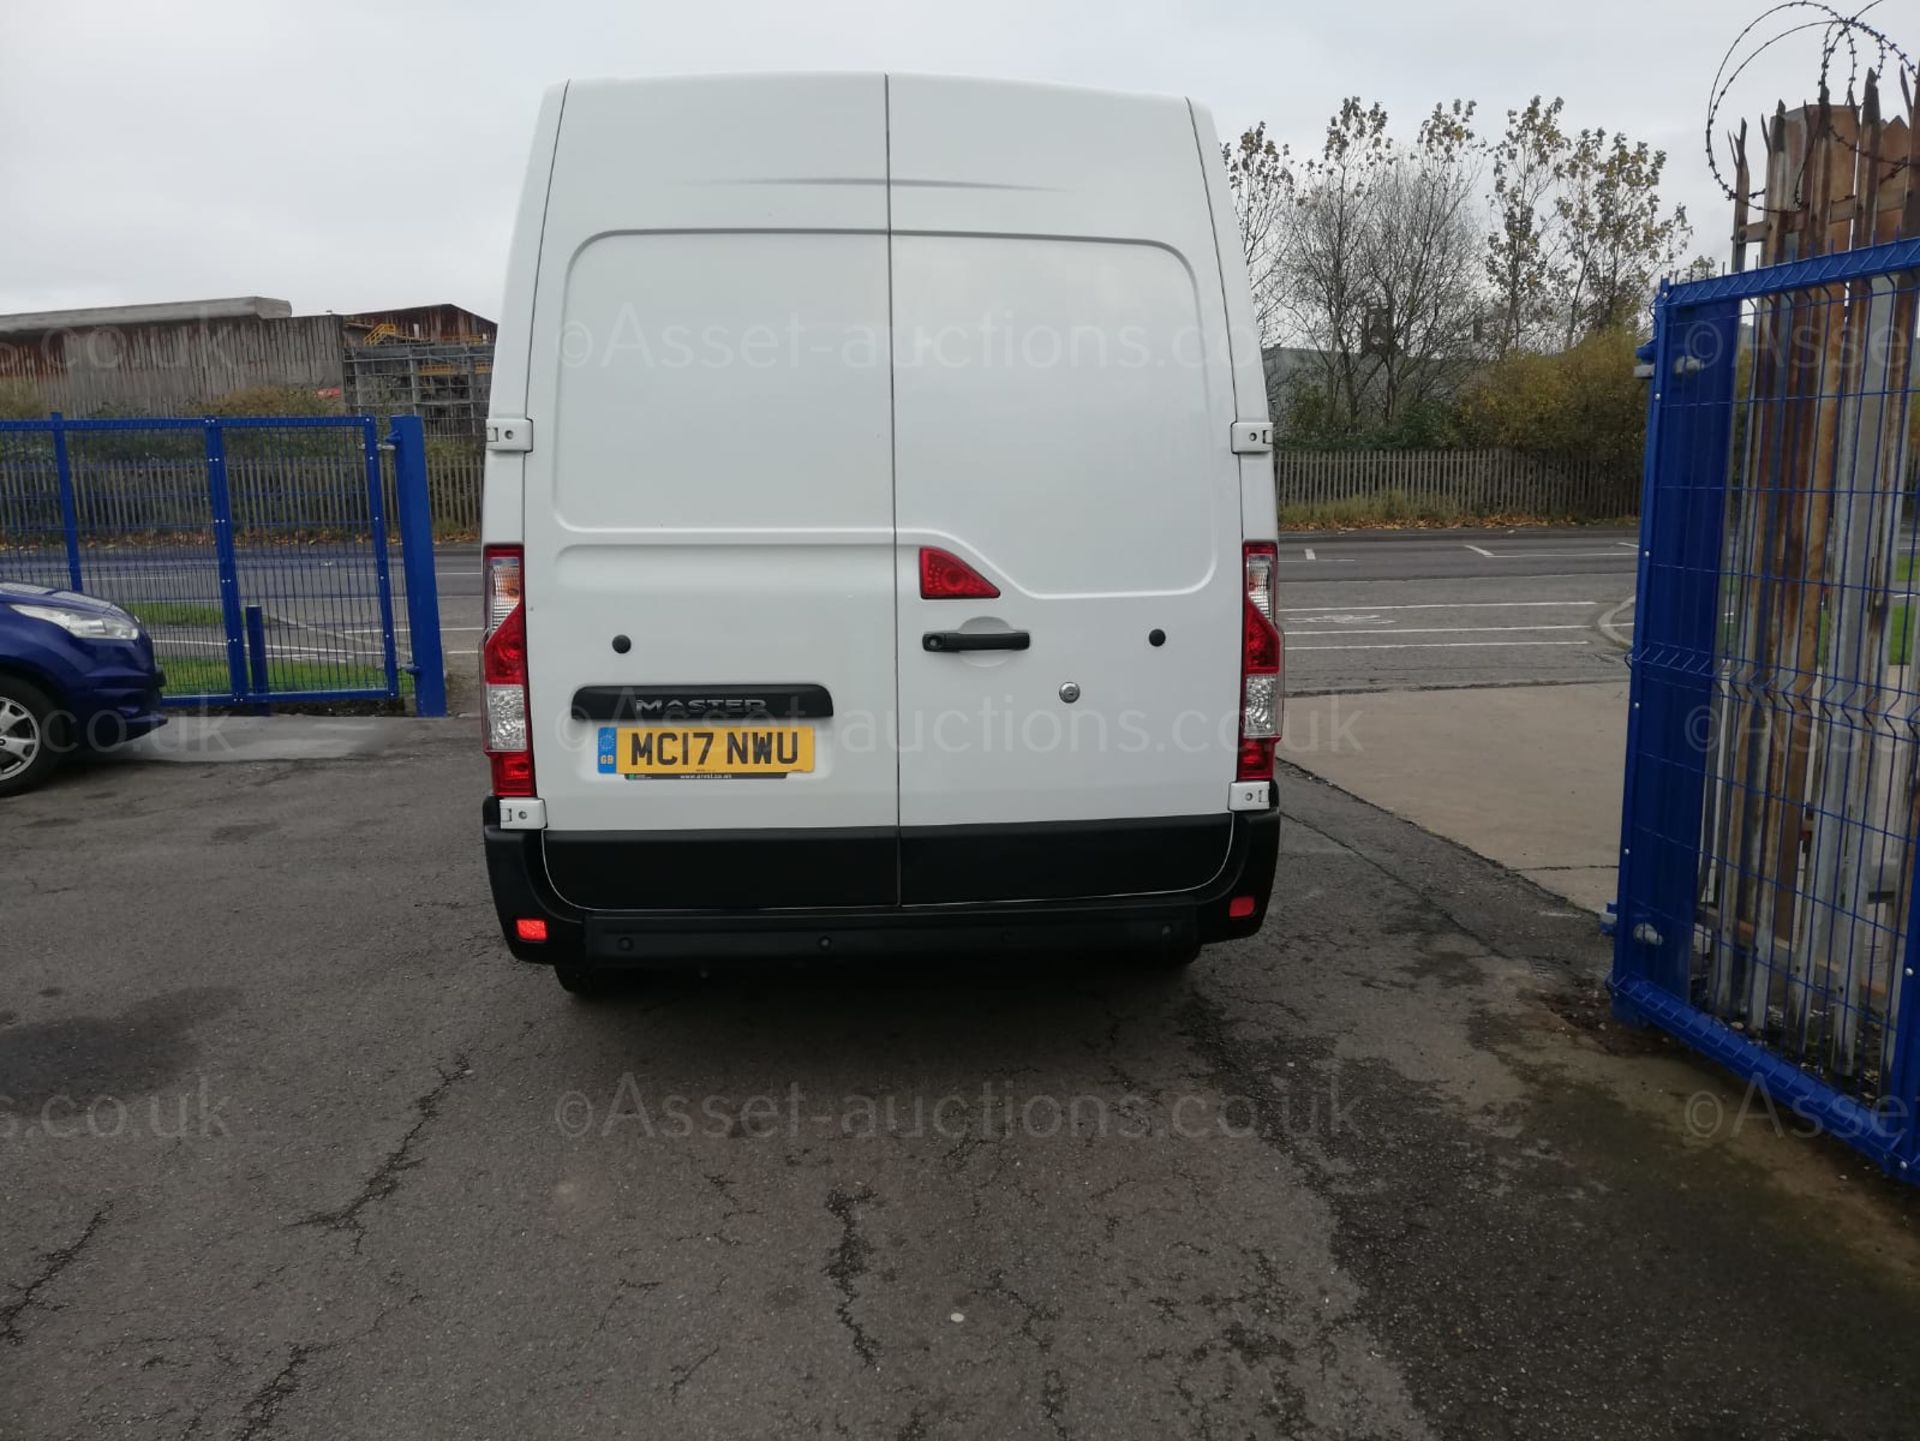 2017/17 RENAULT MASTER LM35 BUSINESS DCI L3H2 WHITE PANEL VAN, 106K MILES WITH SERVICE HISTORY - Image 6 of 9